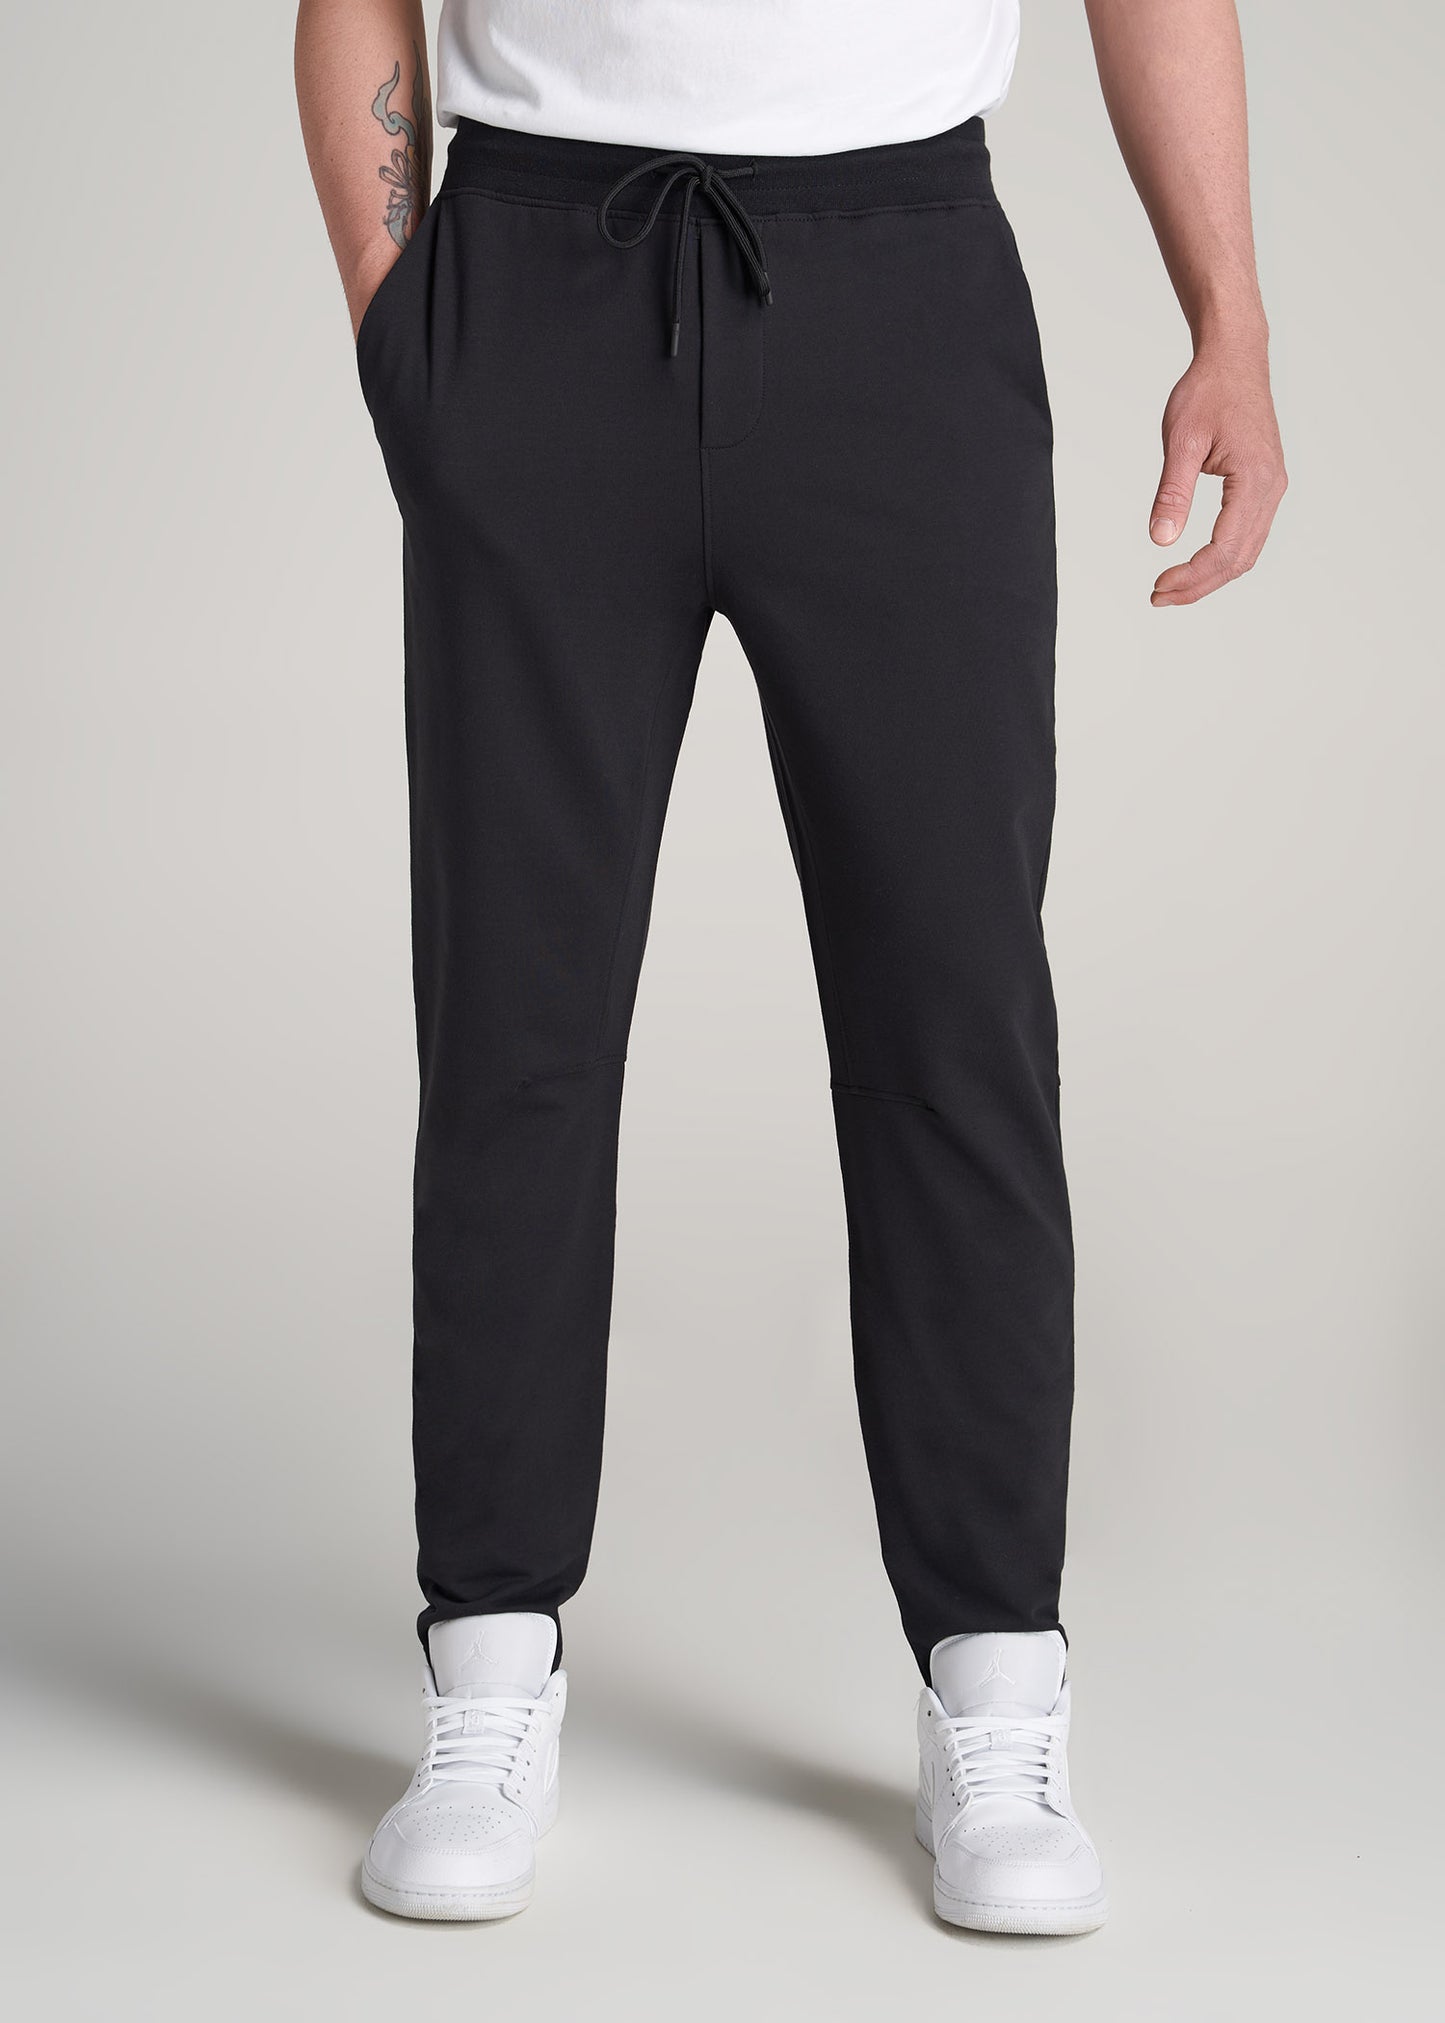 Men's Tall Performance French Terry Sweatpants Black